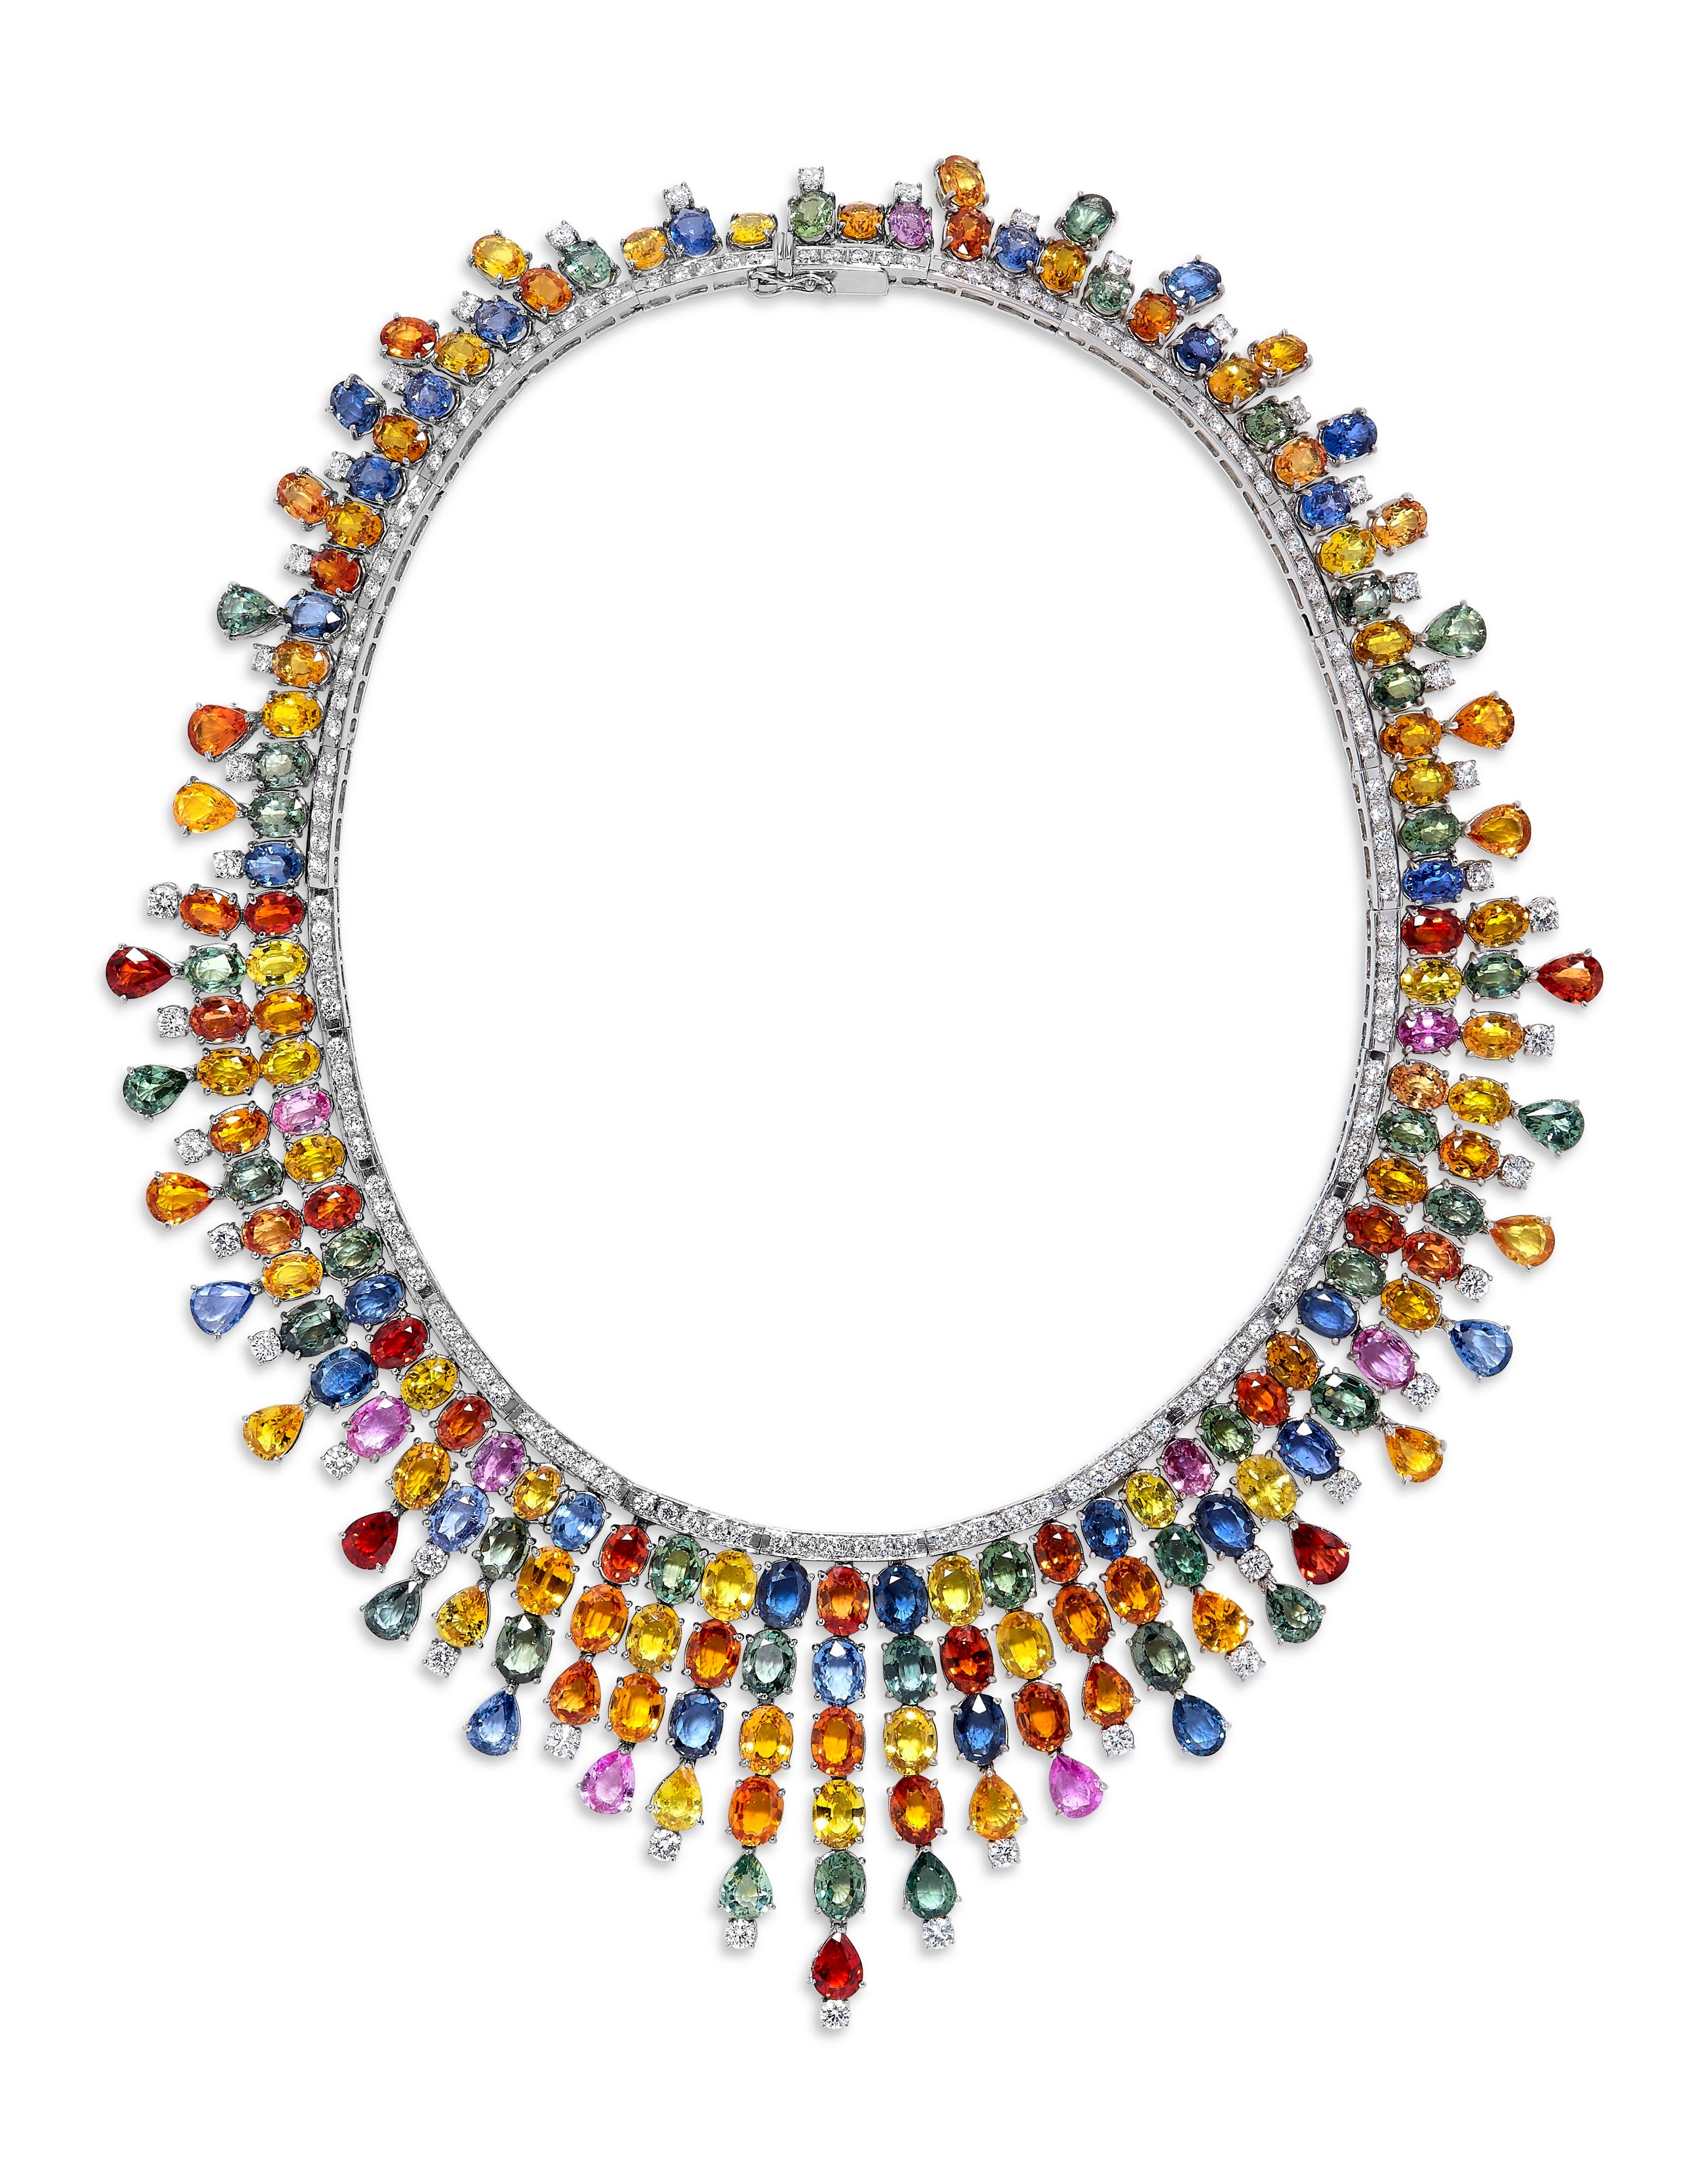 From the museum vault at Emilio Jewelry in New York,
A one of a kind hand made necklace with 176 multi colored natural sapphires matched perfectly. Please see the details below. Please inquire for more details! 
174 diamonds 12.22cts E-F vvs2+
176